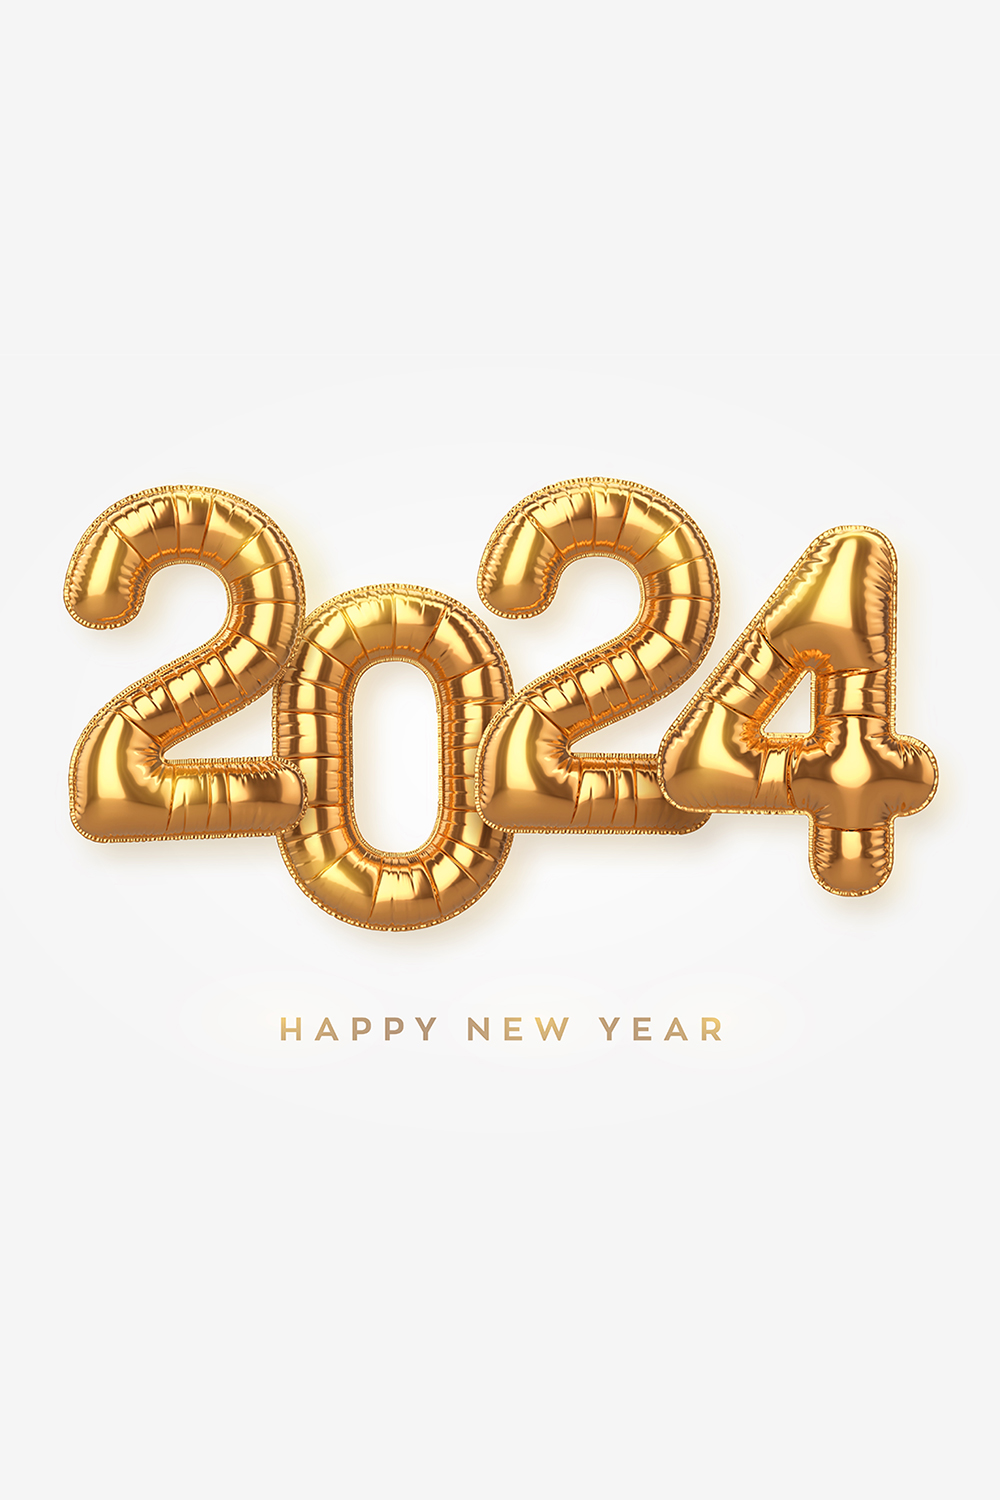 Golden foil balloon numbers 2024 on white background High detailed 3D realistic gold foil helium balloons Vector illustration pinterest preview image.